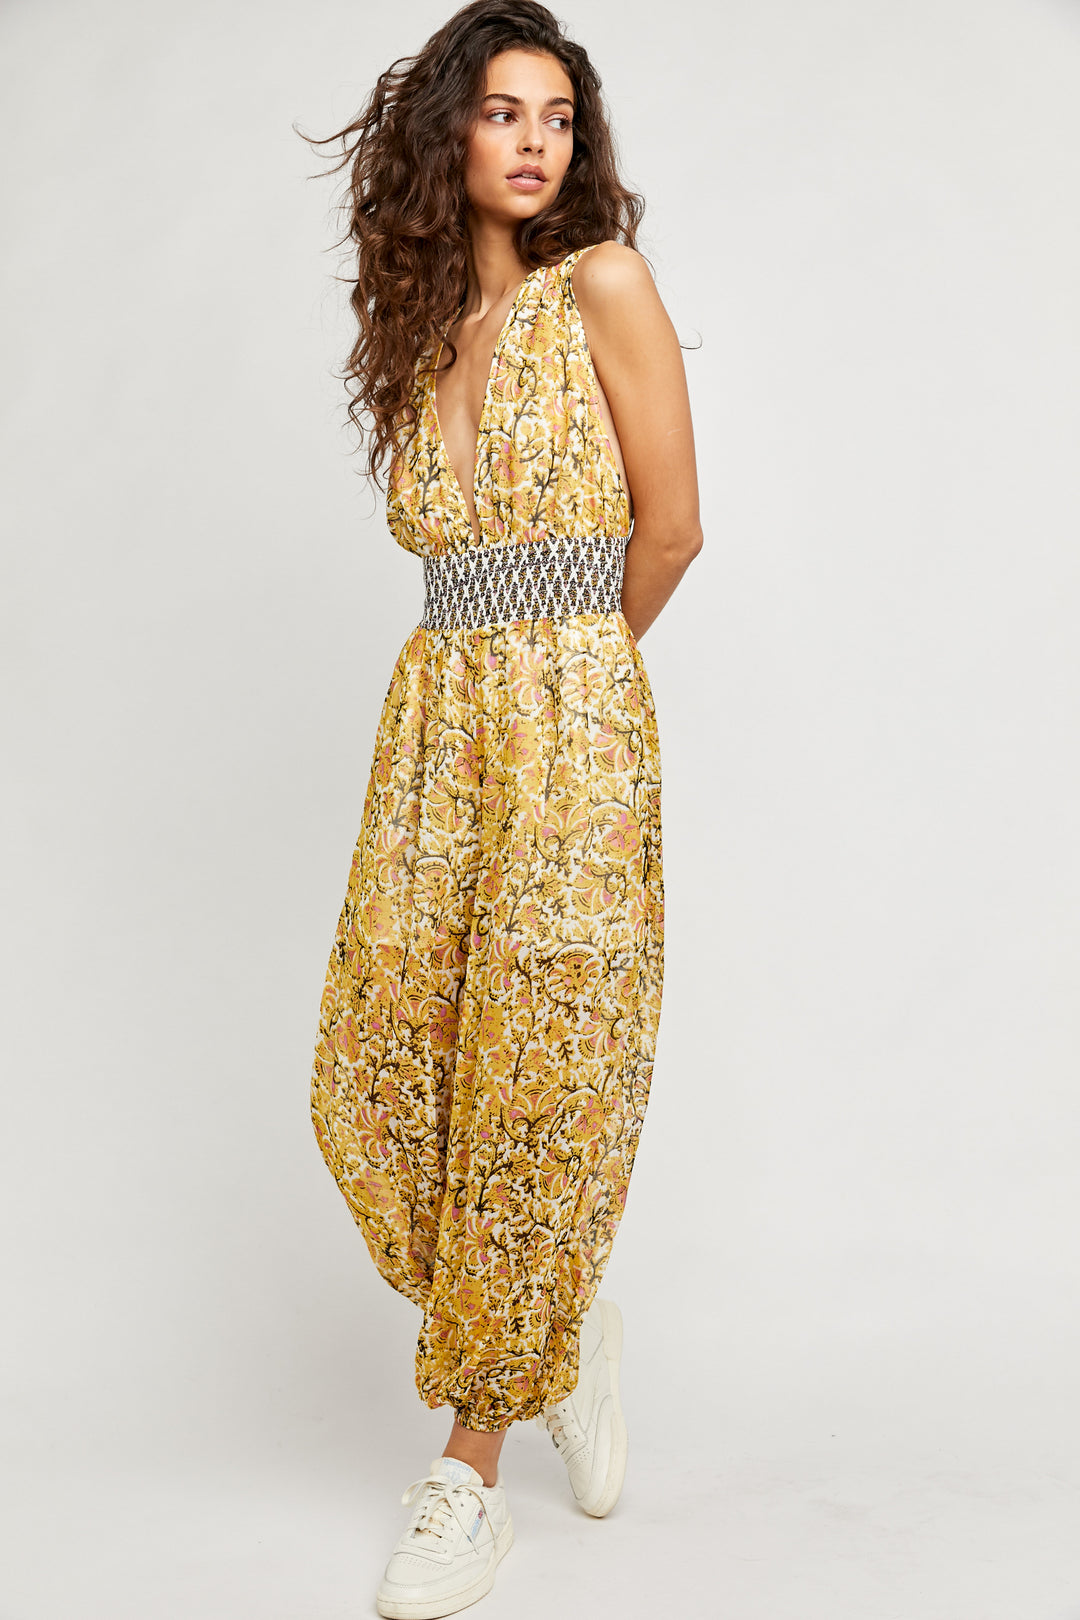 Maria's Soft Yellow Jumpsuit - Free People
Maria's Yellow Jumpsuit Free People's femme and floral one piece from our easy feeling jumpsuit. Sleeveless and cinched at the waist and bottom of the leg. Flowy silhouette and great for any event this spring & summer. Care/Import Hand Wash Cold Import
Maria's Soft Yellow Jumpsuit - Free People
Maria's Yellow Jumpsuit Femme and floral one piece from our easy feeling jumpsuit. Sleeveless and cinched at the waist and bottom of the leg. Flowy silhouette 
OB1204345
195